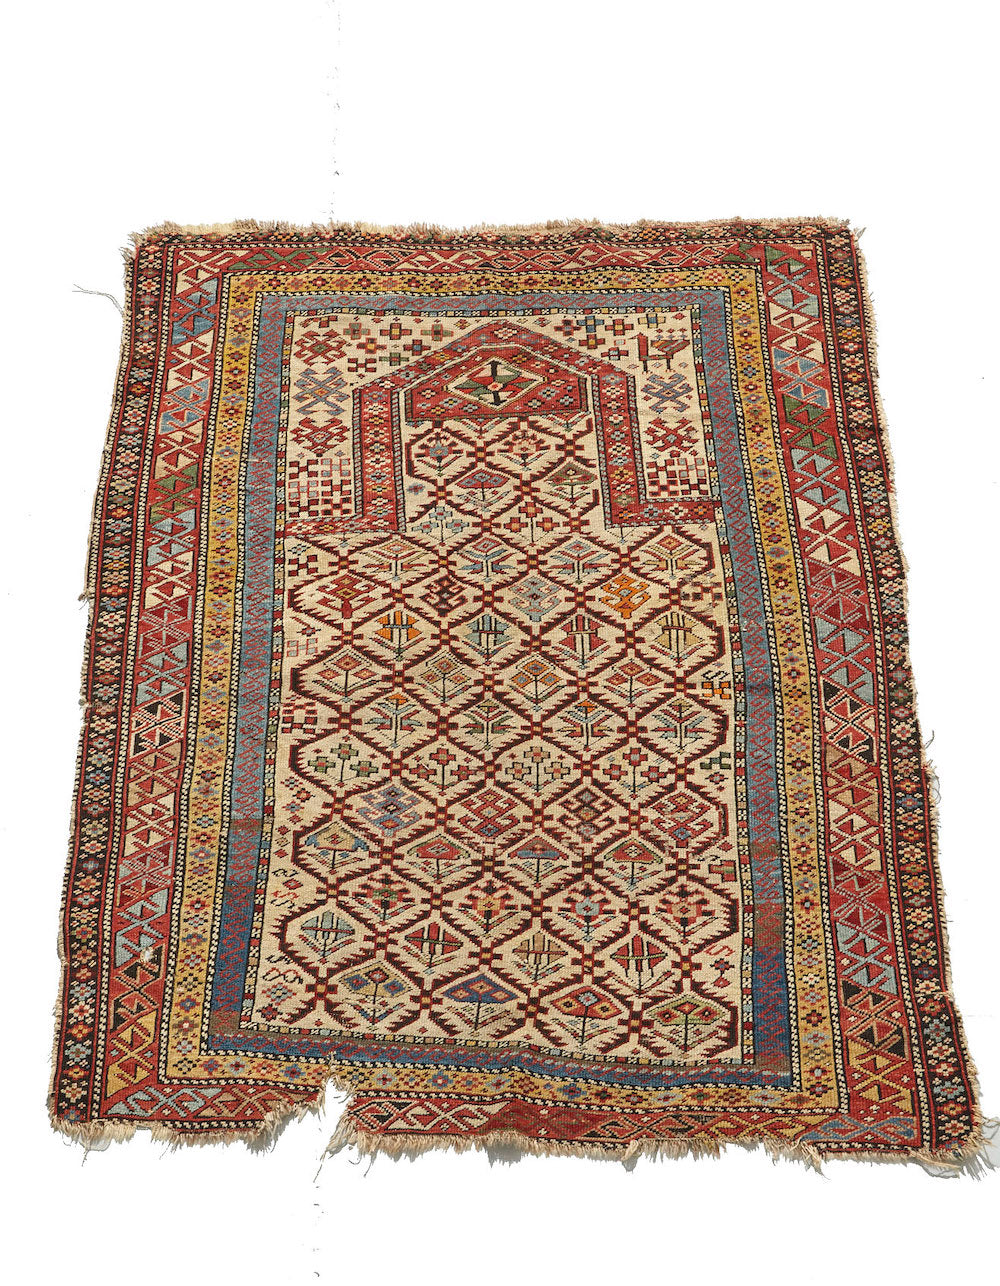 Shirvan Persian Prayer Rug. Intricately woven in beige, gold, green, blue and red with floral plant designs throughout. Perfect for a bedroom, study, bathroom or kitchen rug - Available from King Kennedy Rugs Los Angeles